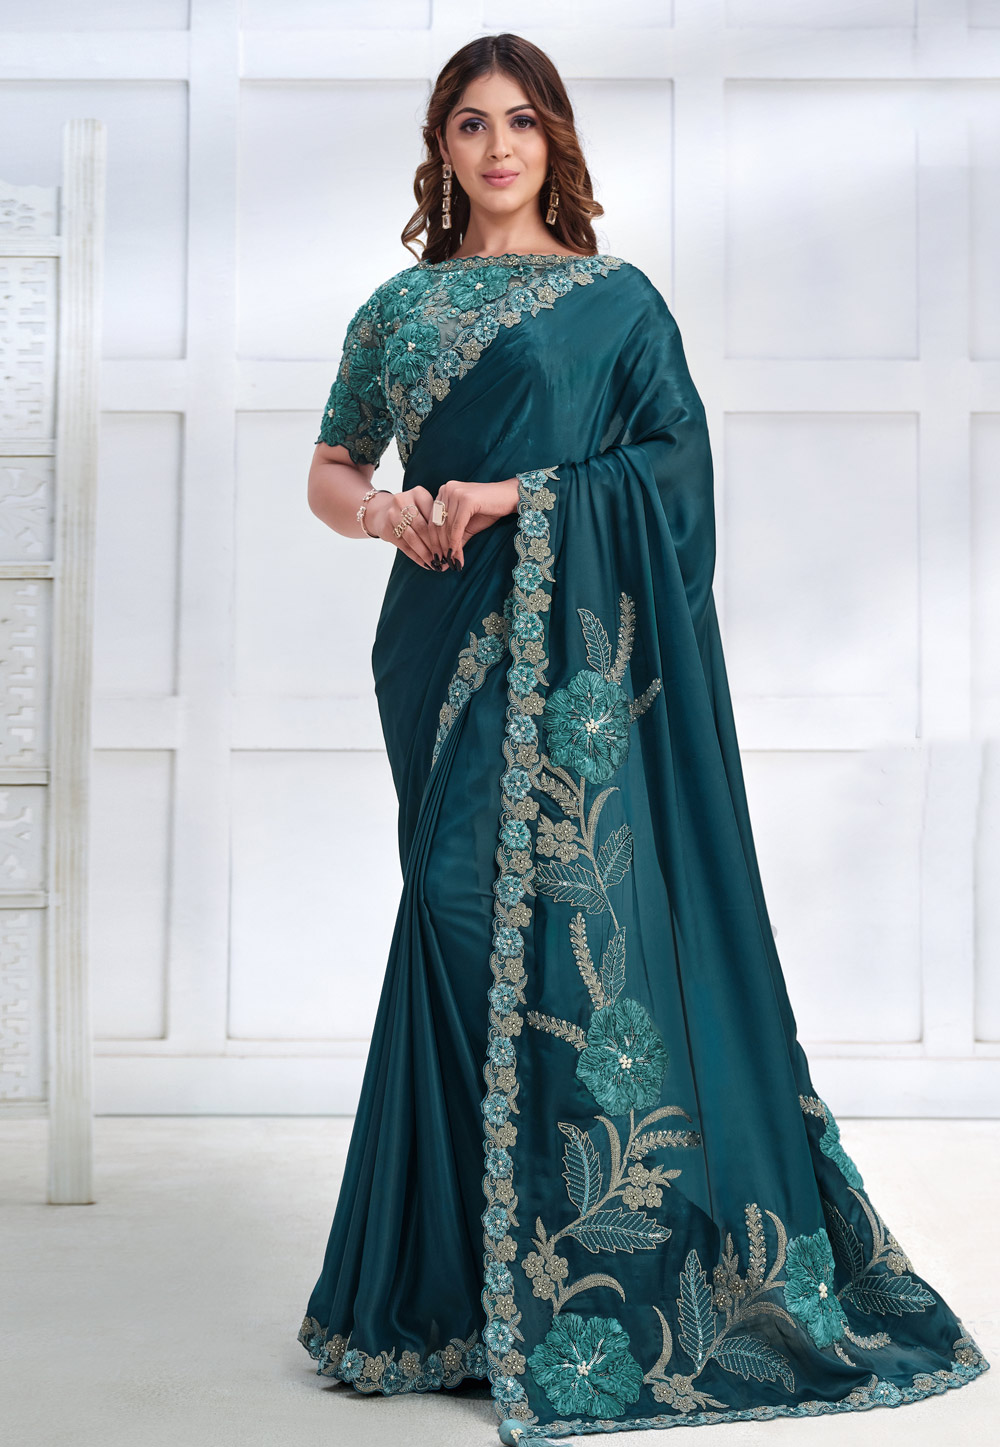 Teal Crepe Saree With Blouse 276021